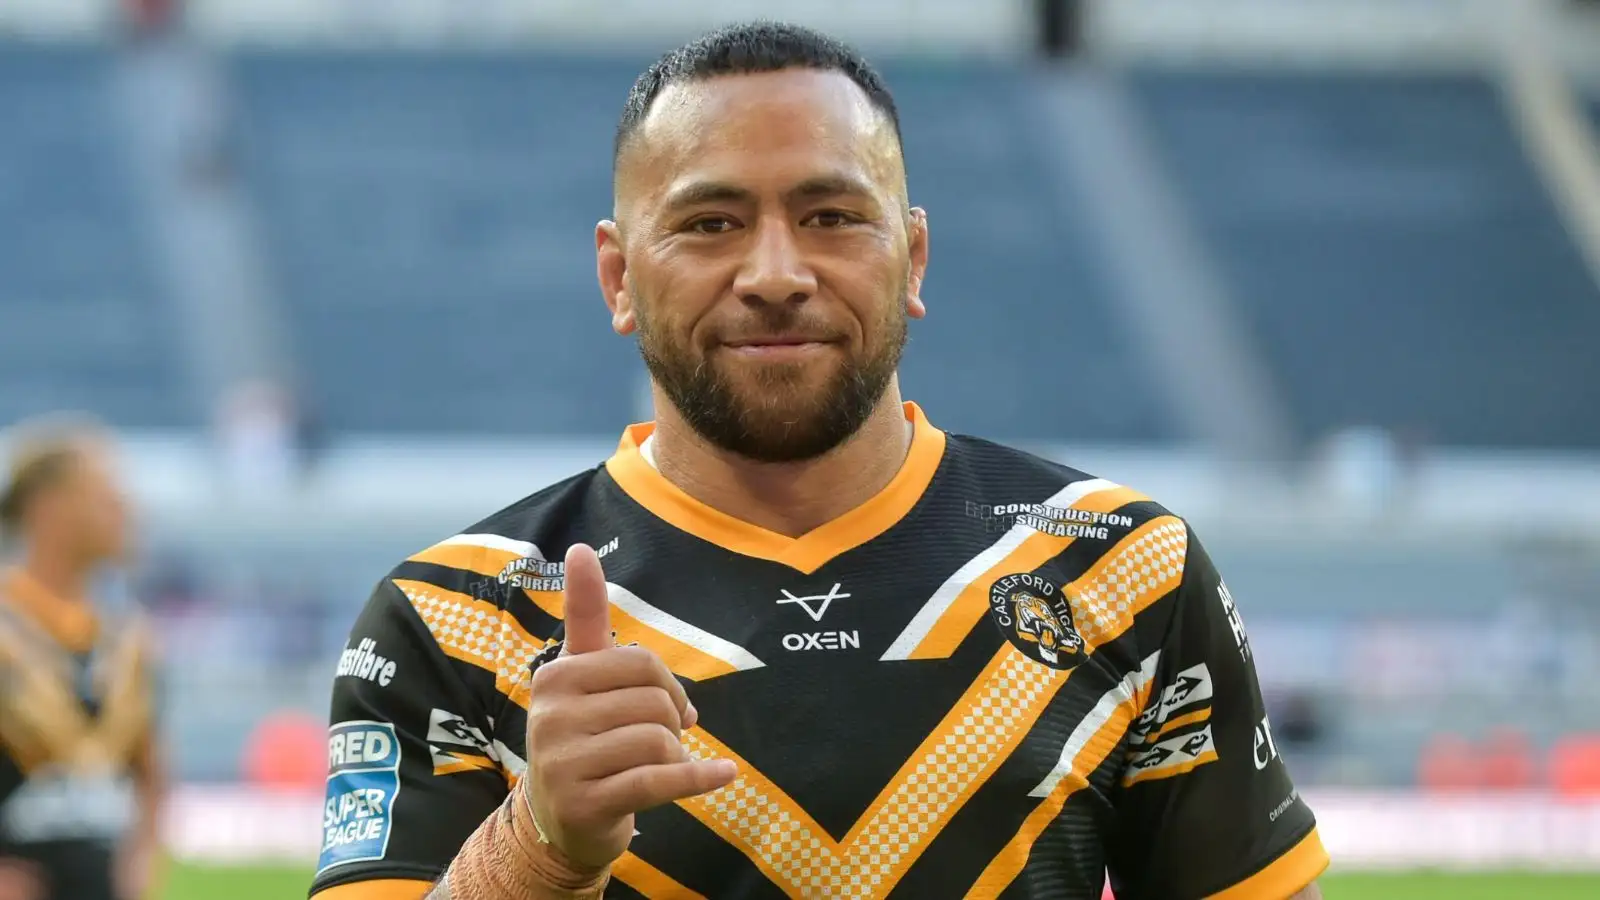 Championship move confirmed for former NRL ace following Castleford Tigers departure: ‘I’m just getting started’